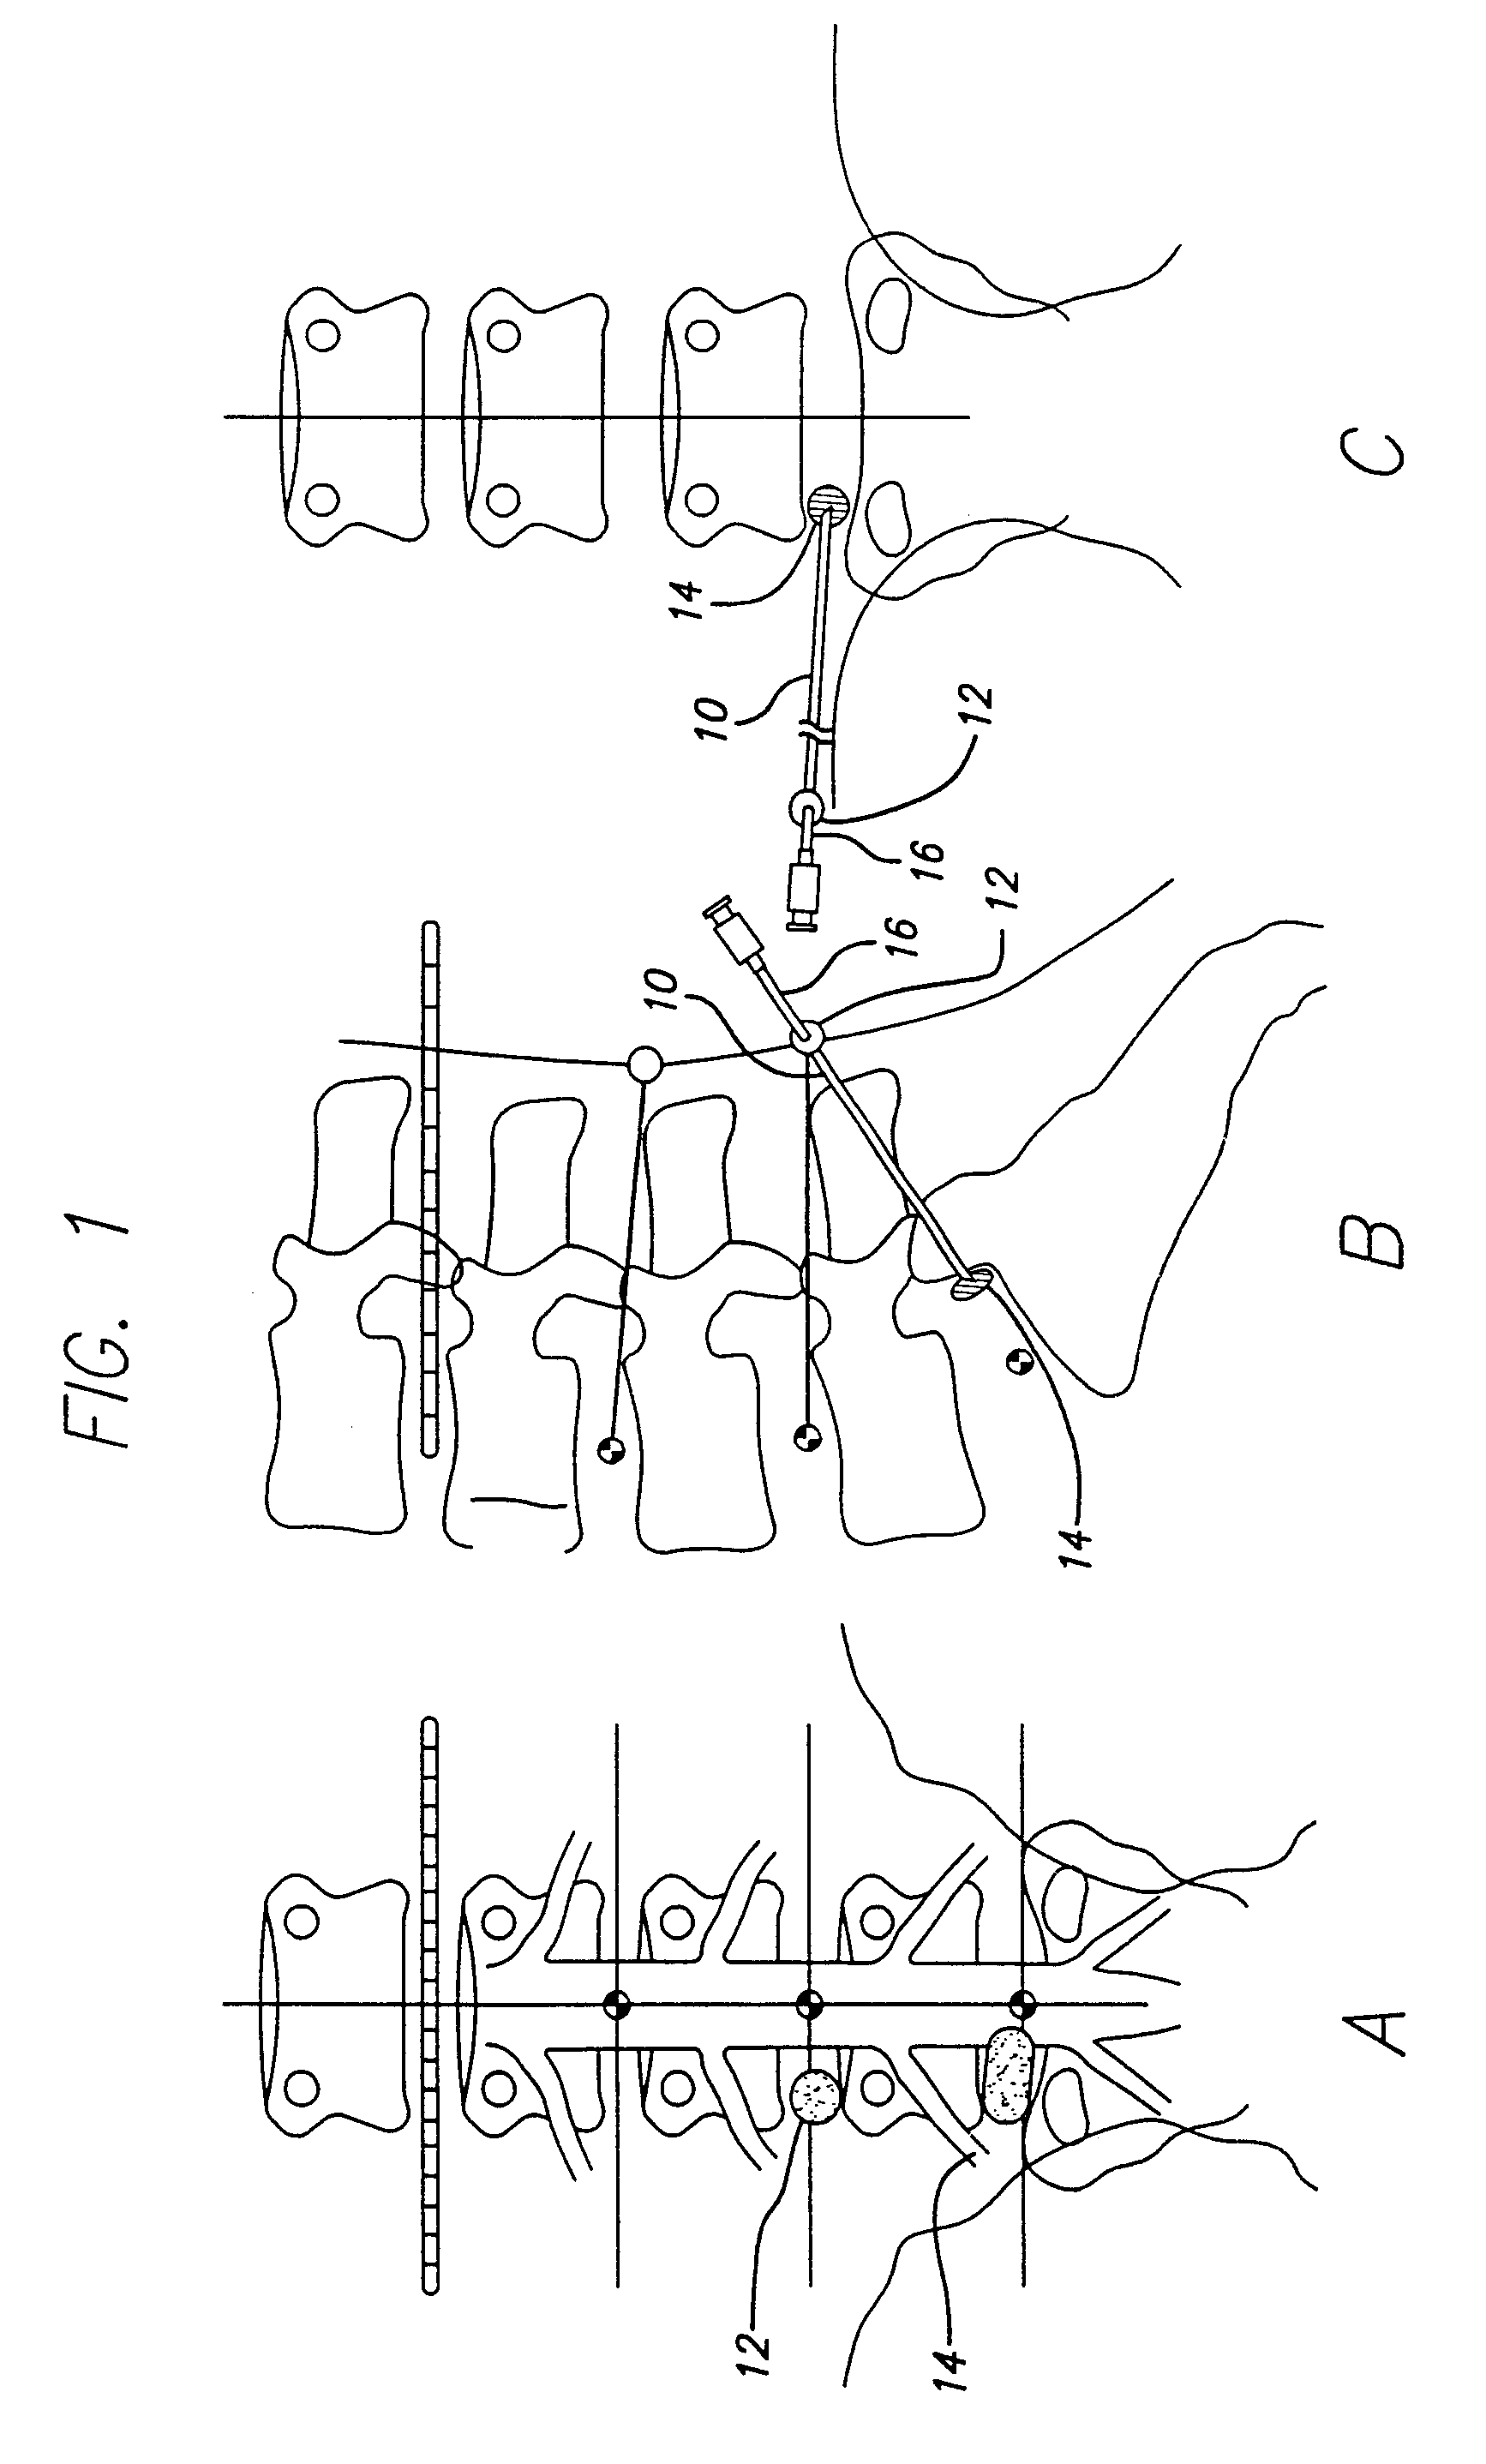 Method and apparatus for endoscopic spinal surgery